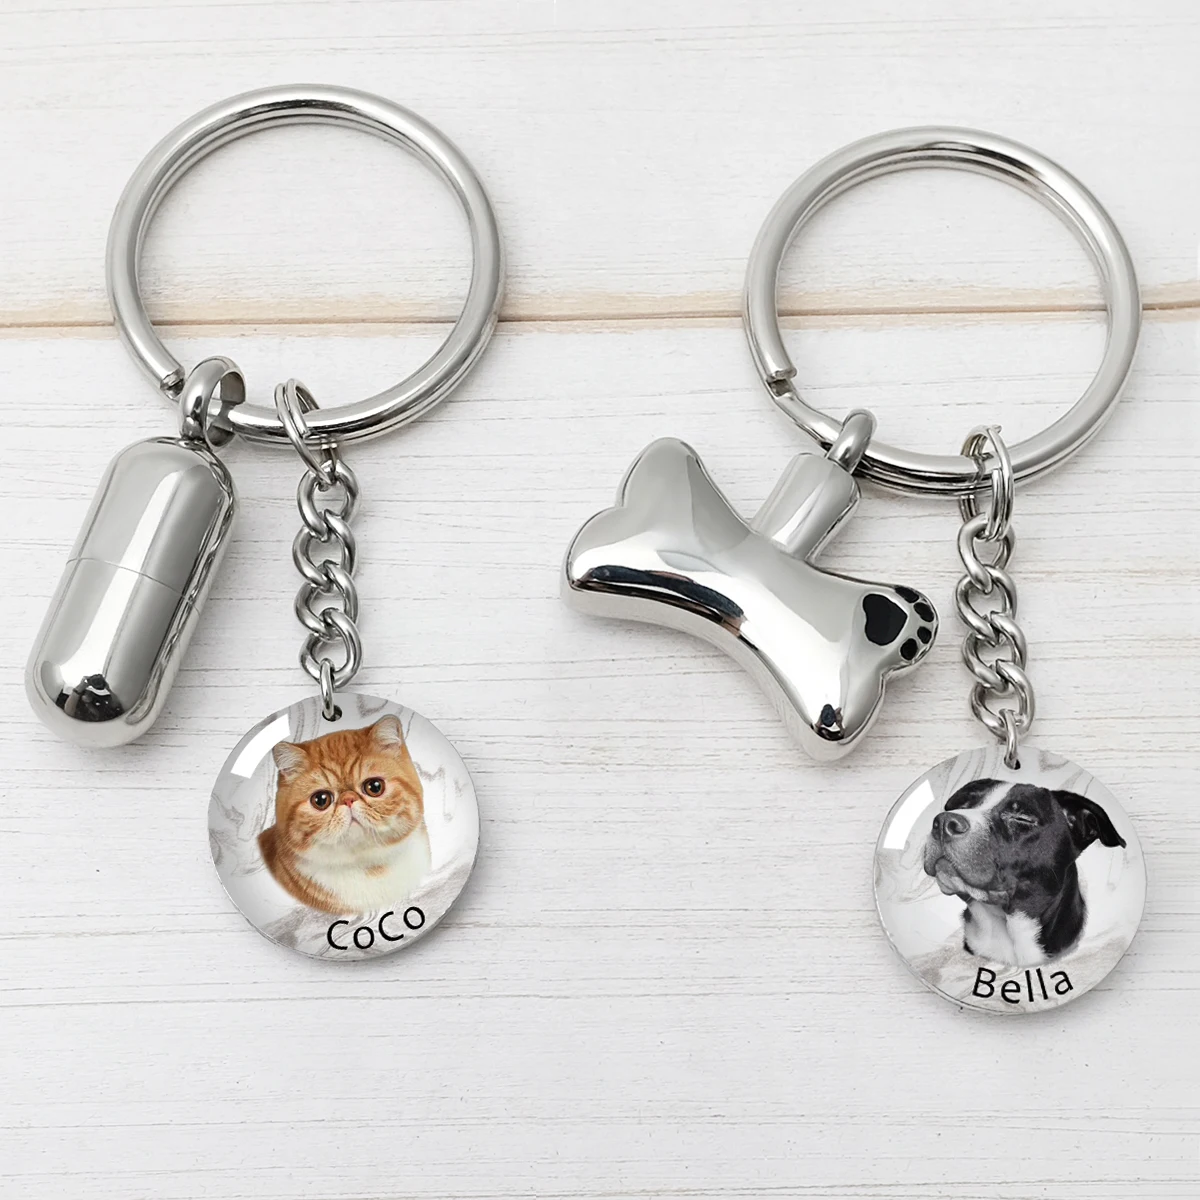 Personalized Pet Cylinder Cremation Urn Keychain,Custom Dog Urn Keychain with Photo,Cat Keepsake Ashes Keyring,Pet Memorial Gift personalized custom cremation of ashes urn dandelion urn keepsake jewelry to commemorate the beloved human ashes